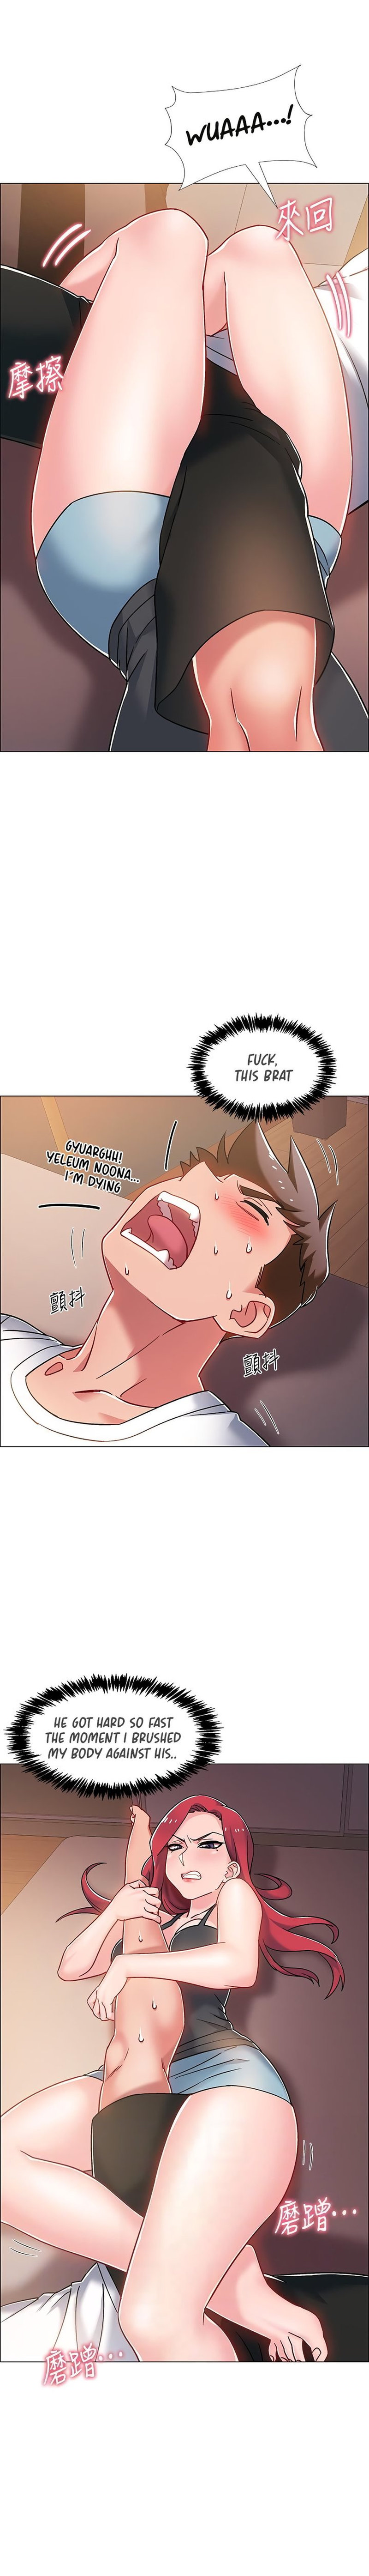 Enlistment Countdown - Chapter 15 Page 10